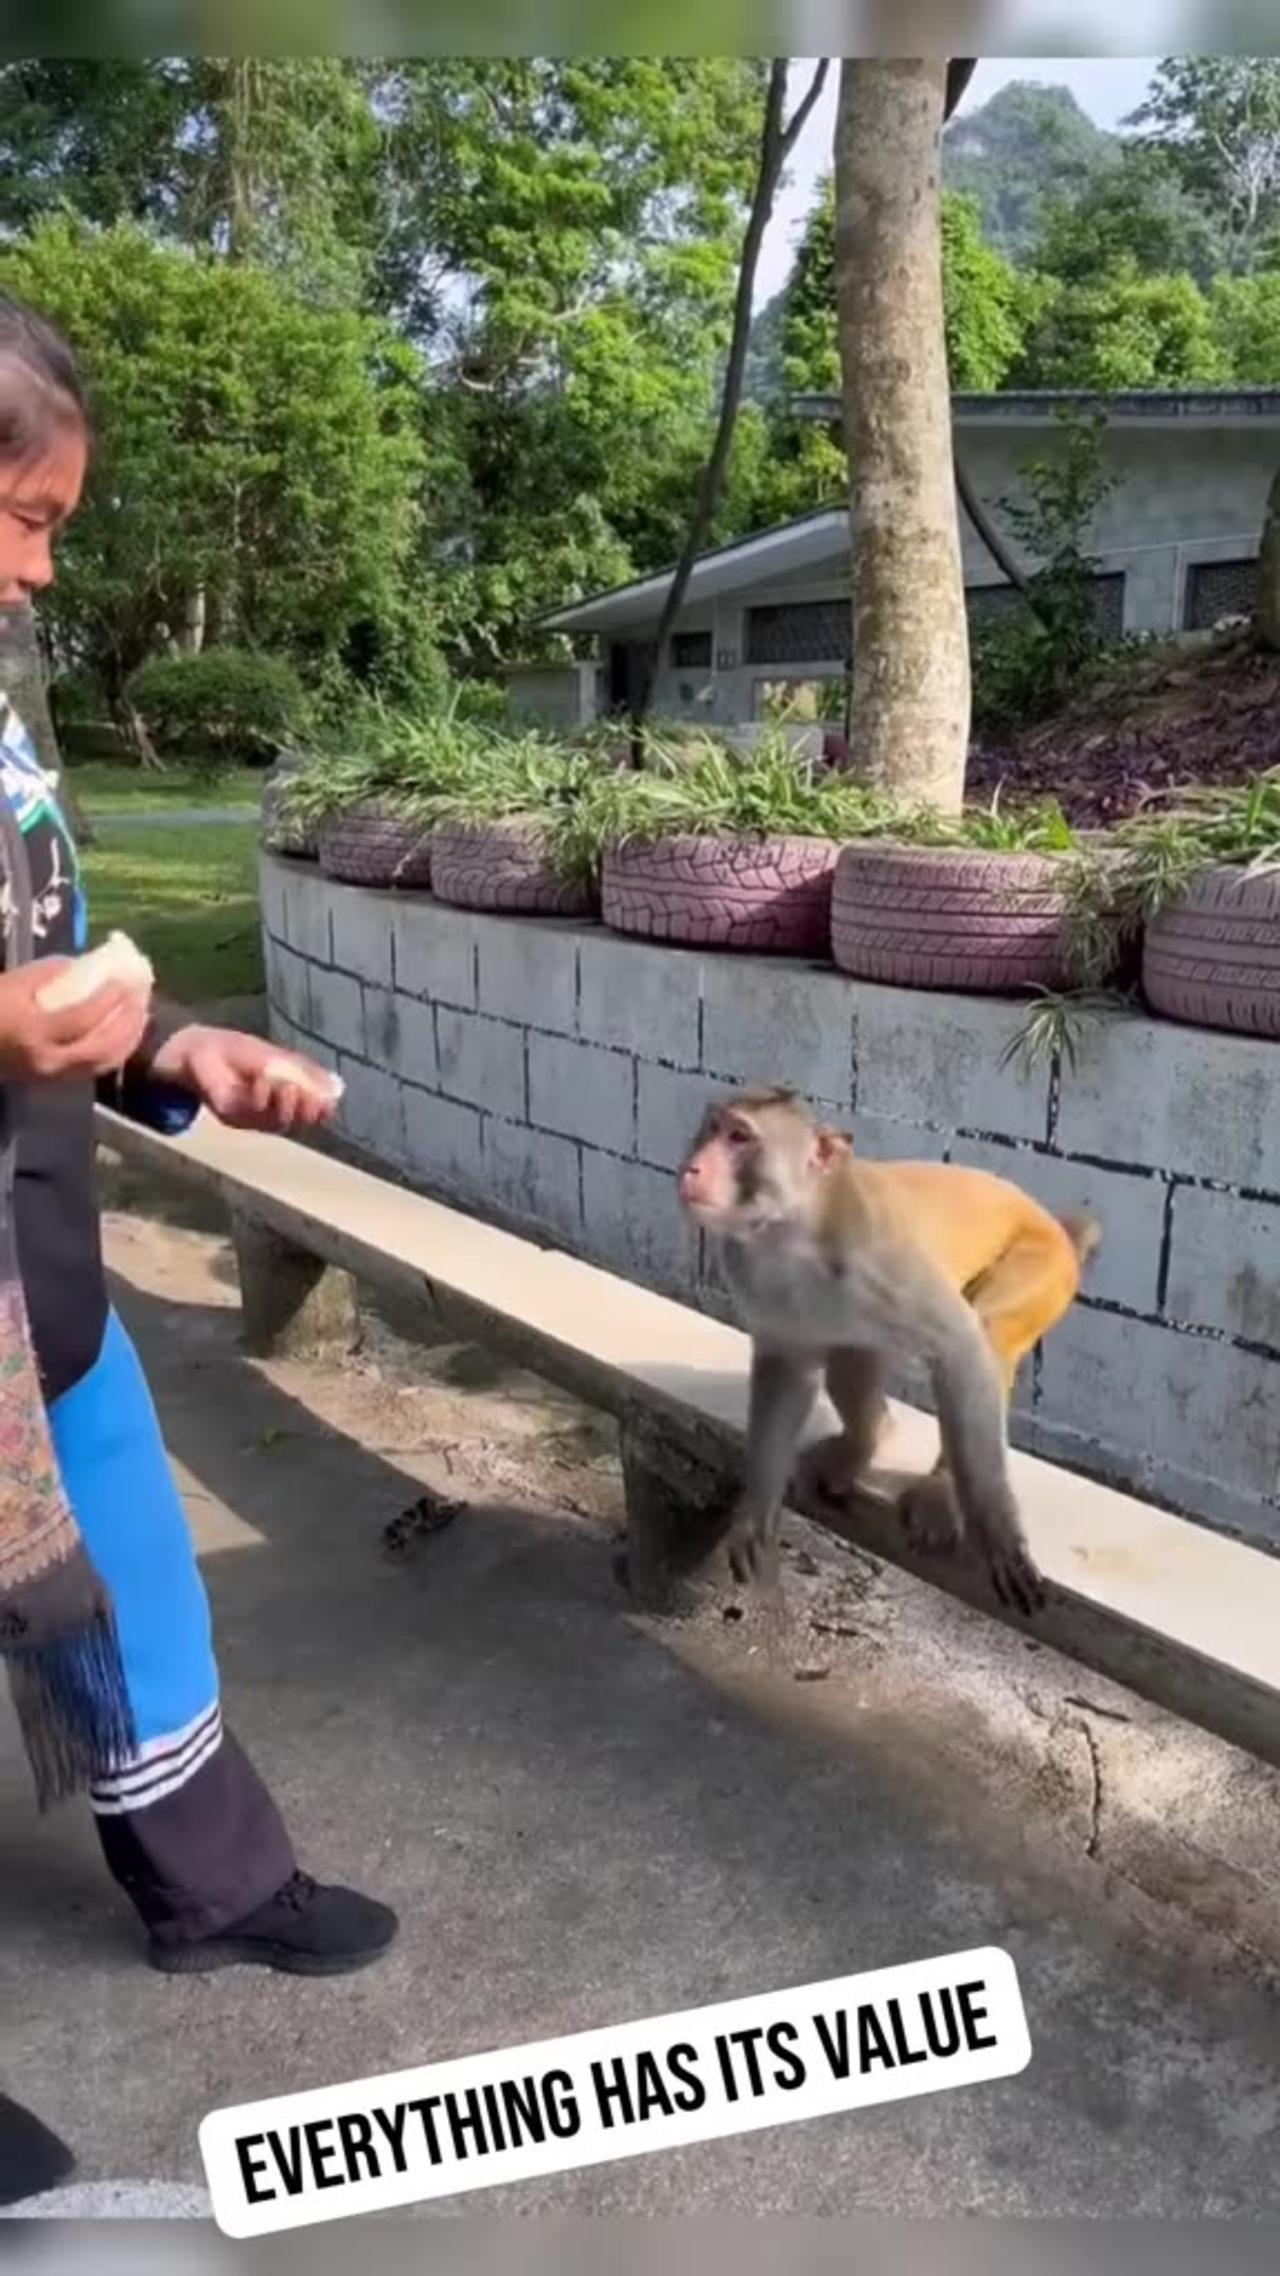 Monkey for food